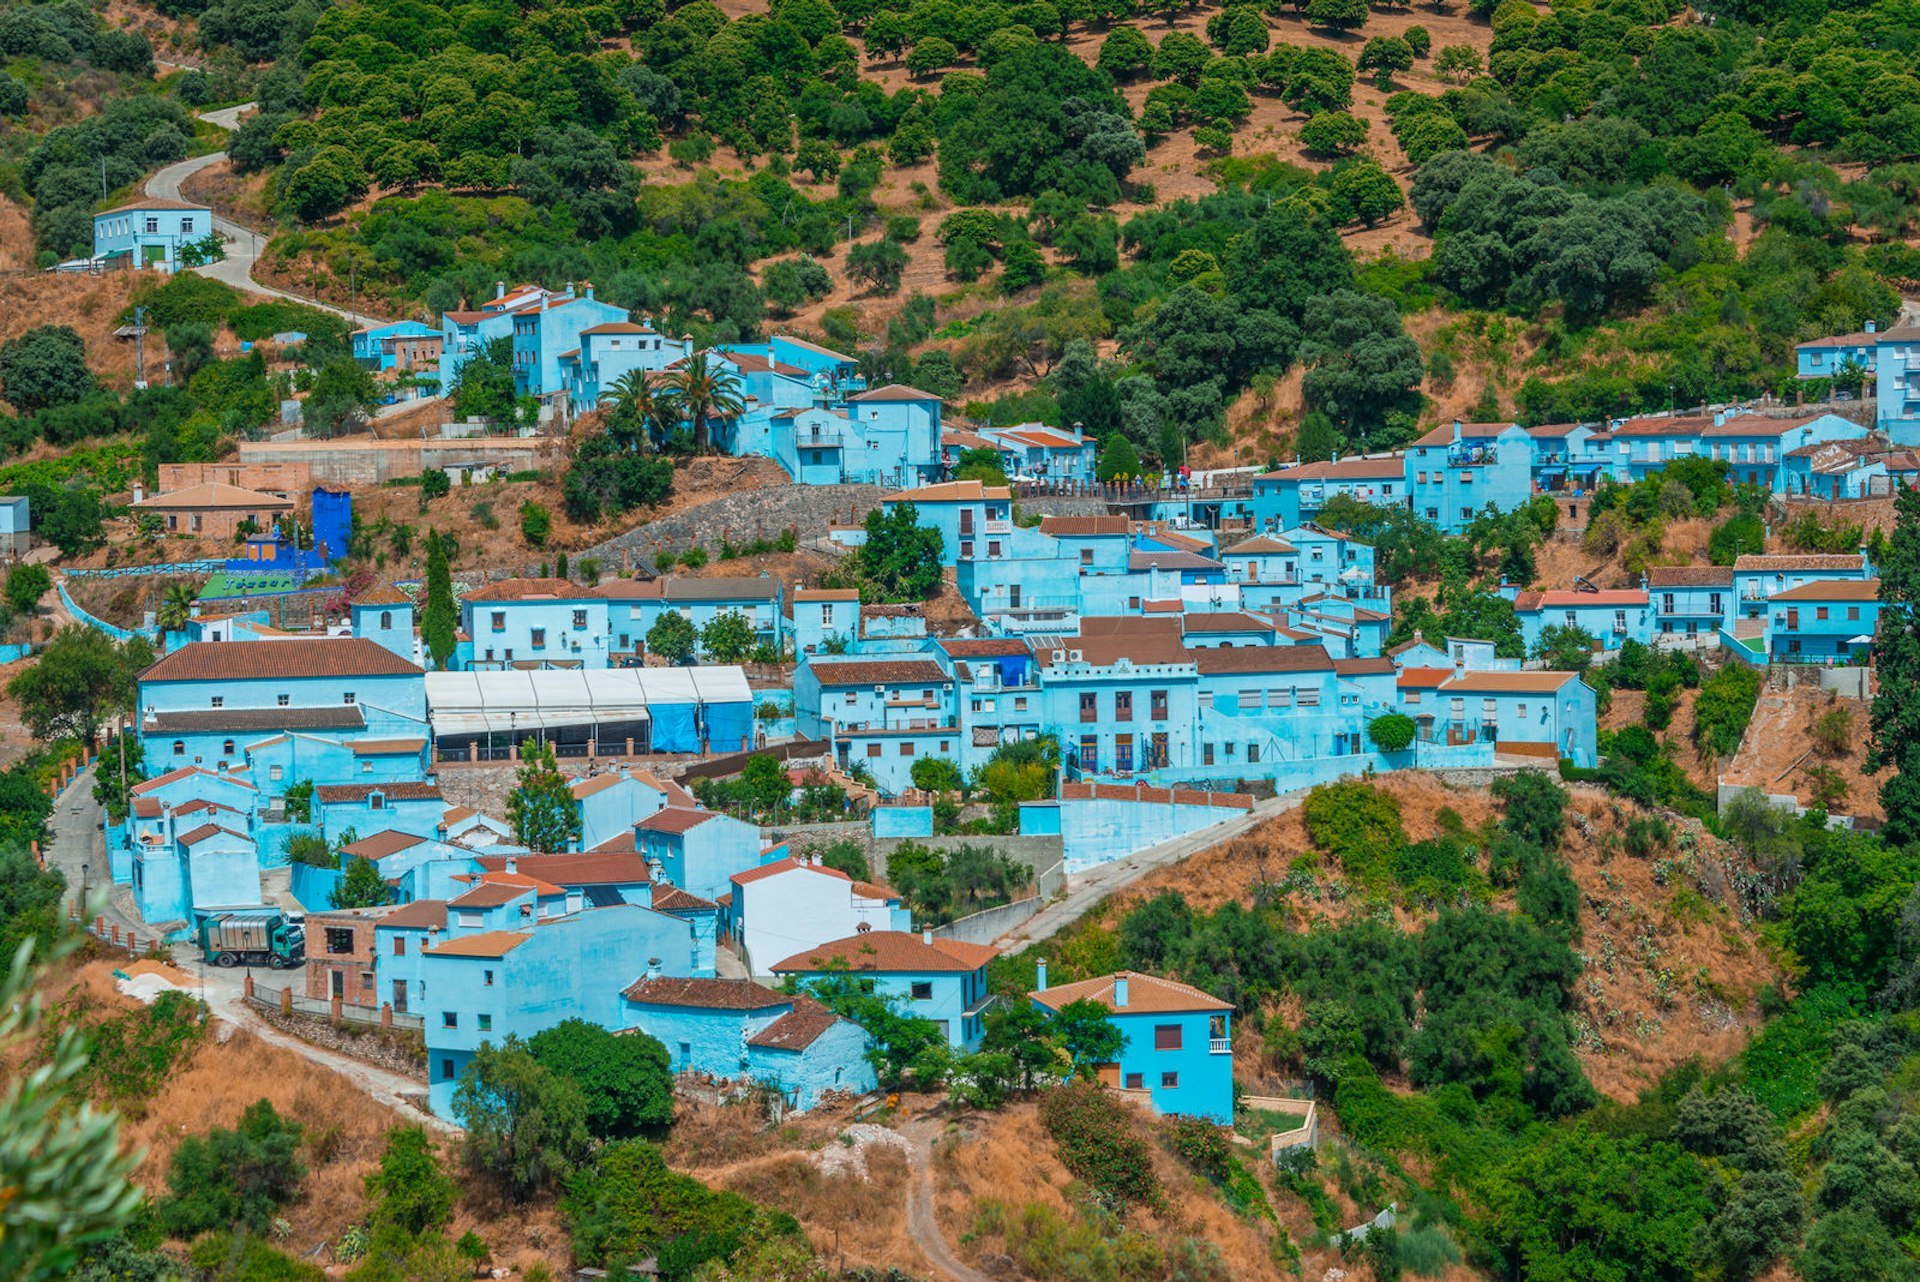 The once white-washed village of Juzcar, now in a blue hue © cineuno / Getty Images